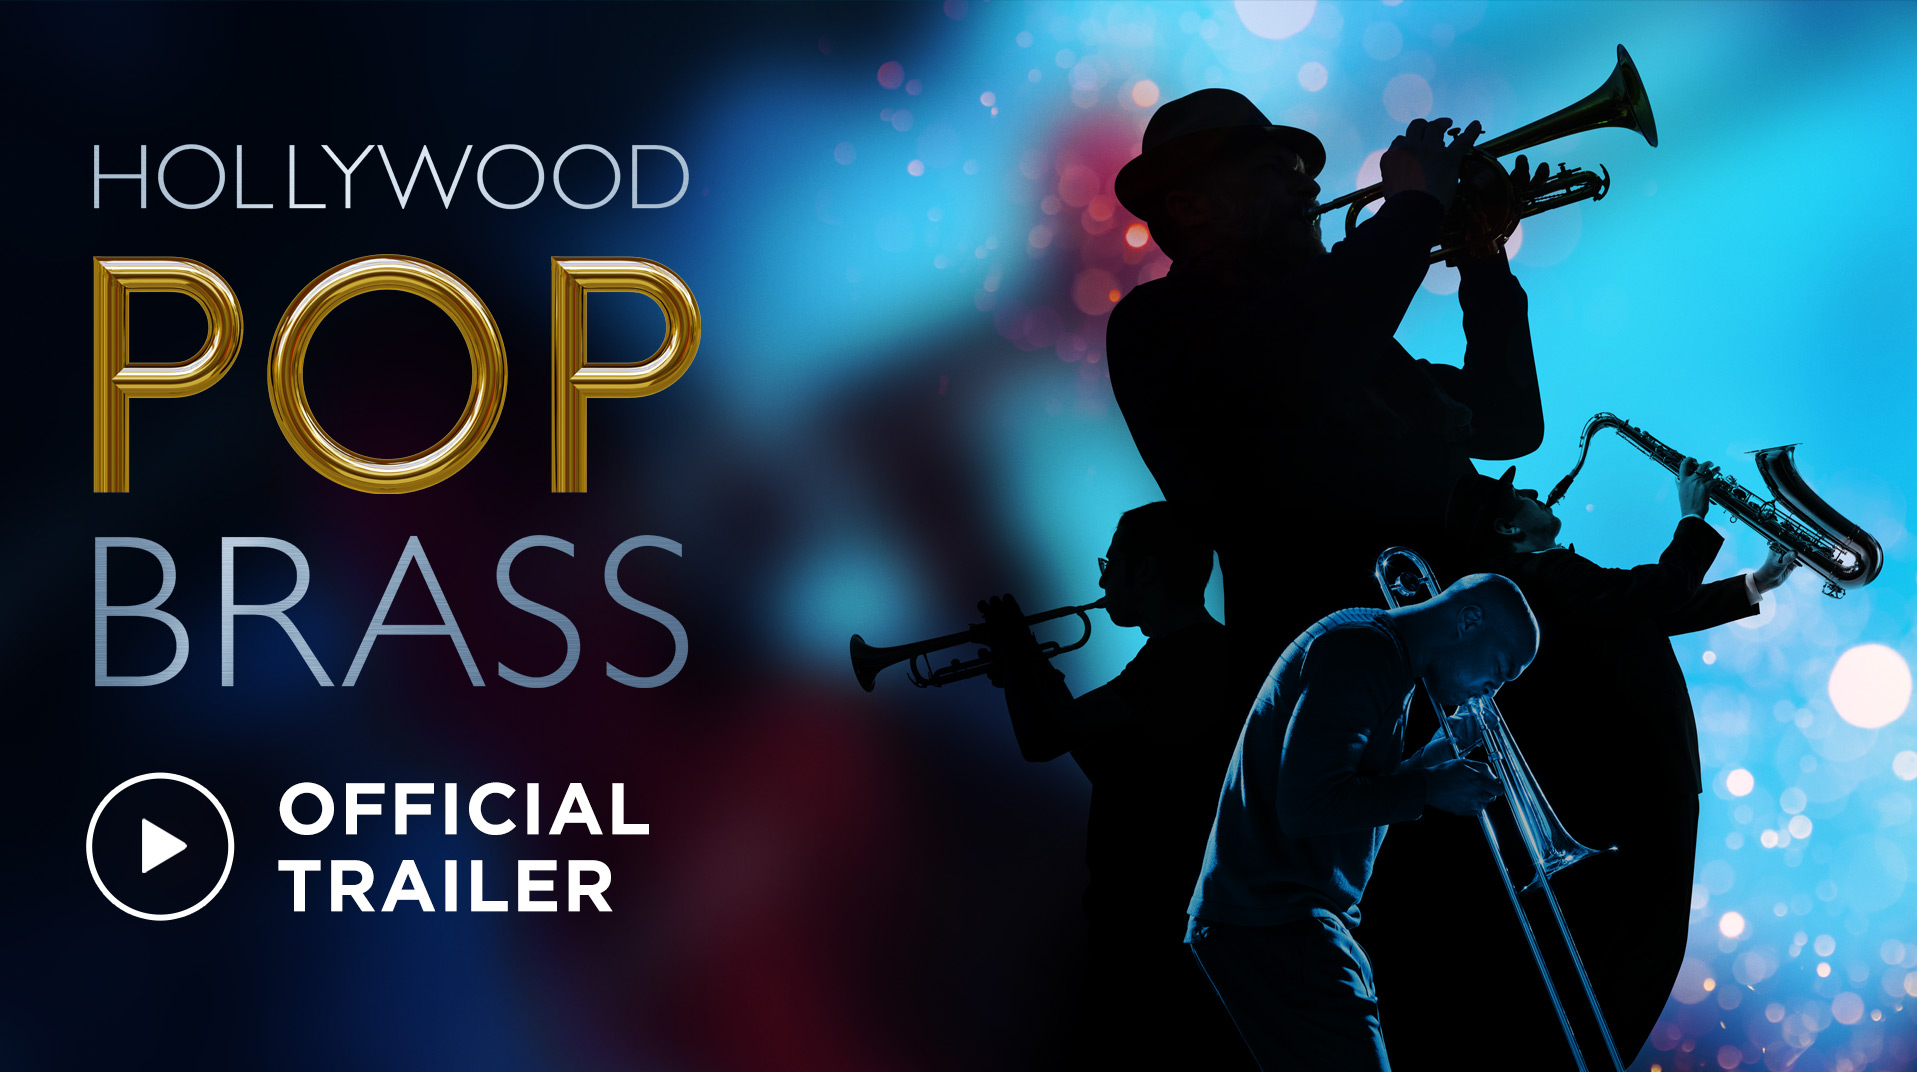 Watch the official Hollywood Pop Brass Trailer